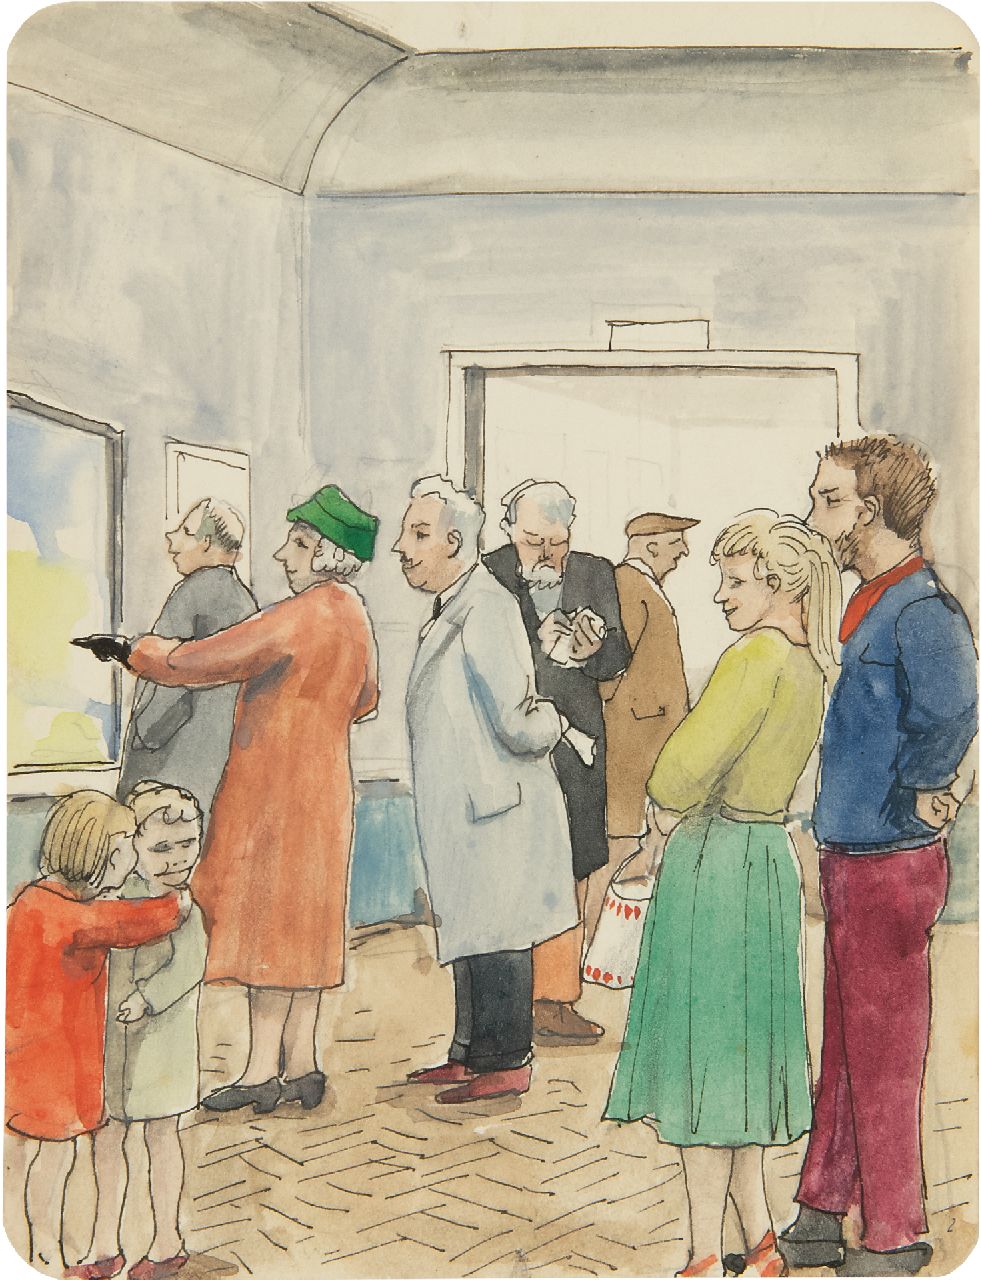 Kamerlingh Onnes H.H.  | 'Harm' Henrick Kamerlingh Onnes | Watercolours and drawings offered for sale | The exhibition (with the painter himself in the middle), pen and ink and watercolour on paper 13.1 x 10.0 cm, signed on the reverse and painted in 1956